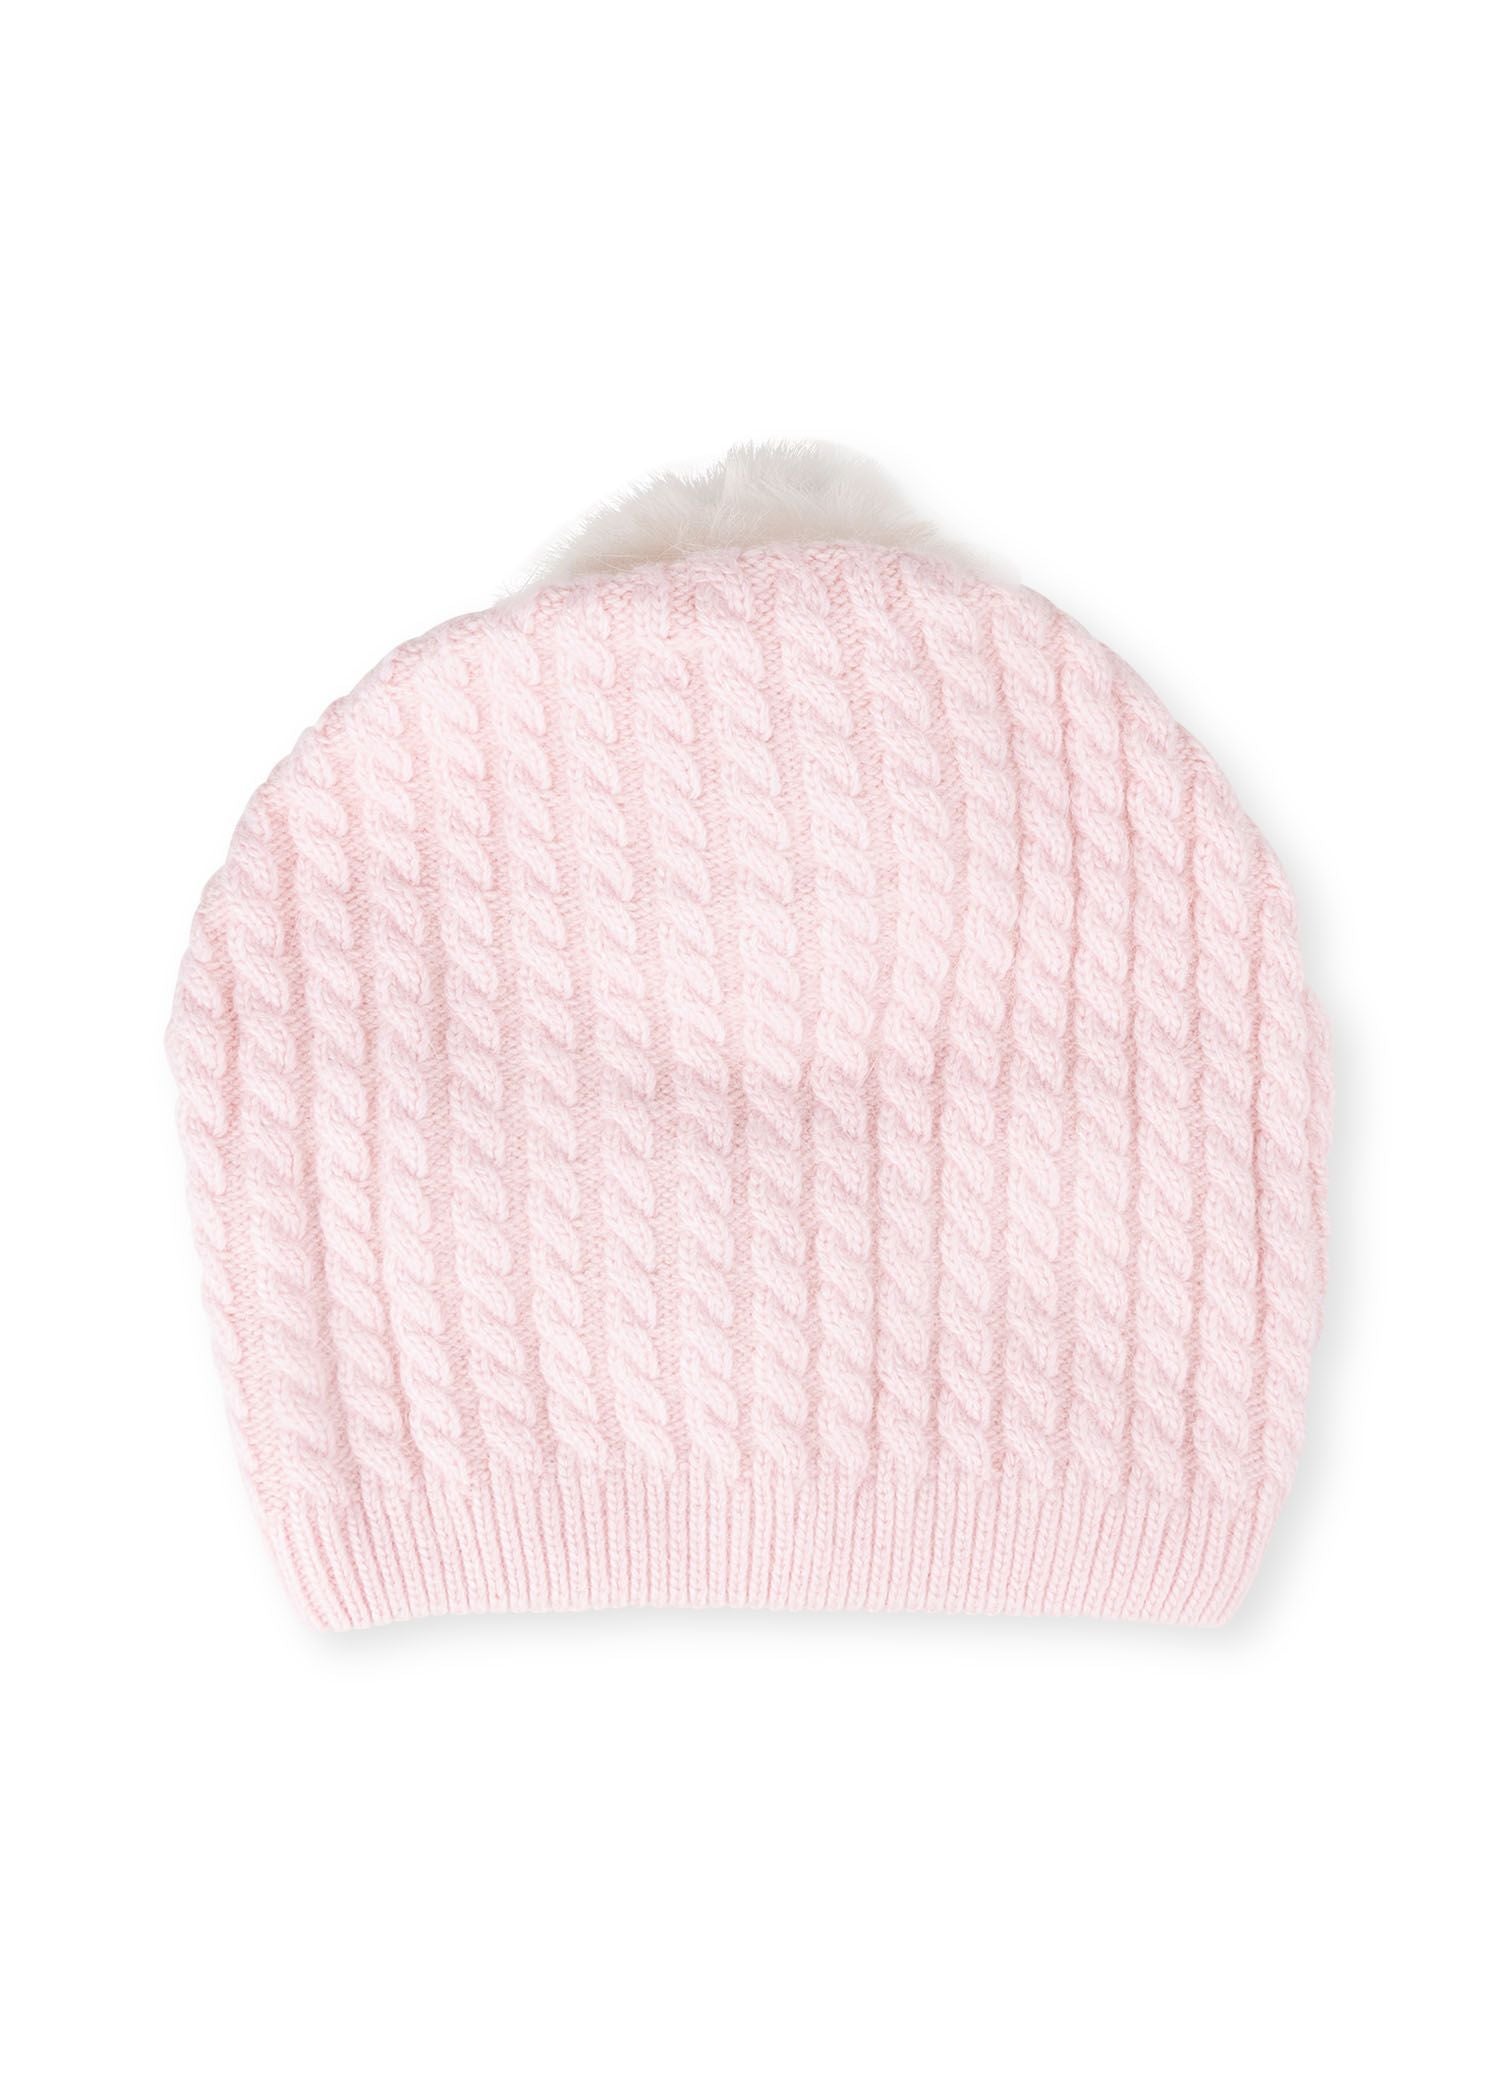 cabin cable hat pink